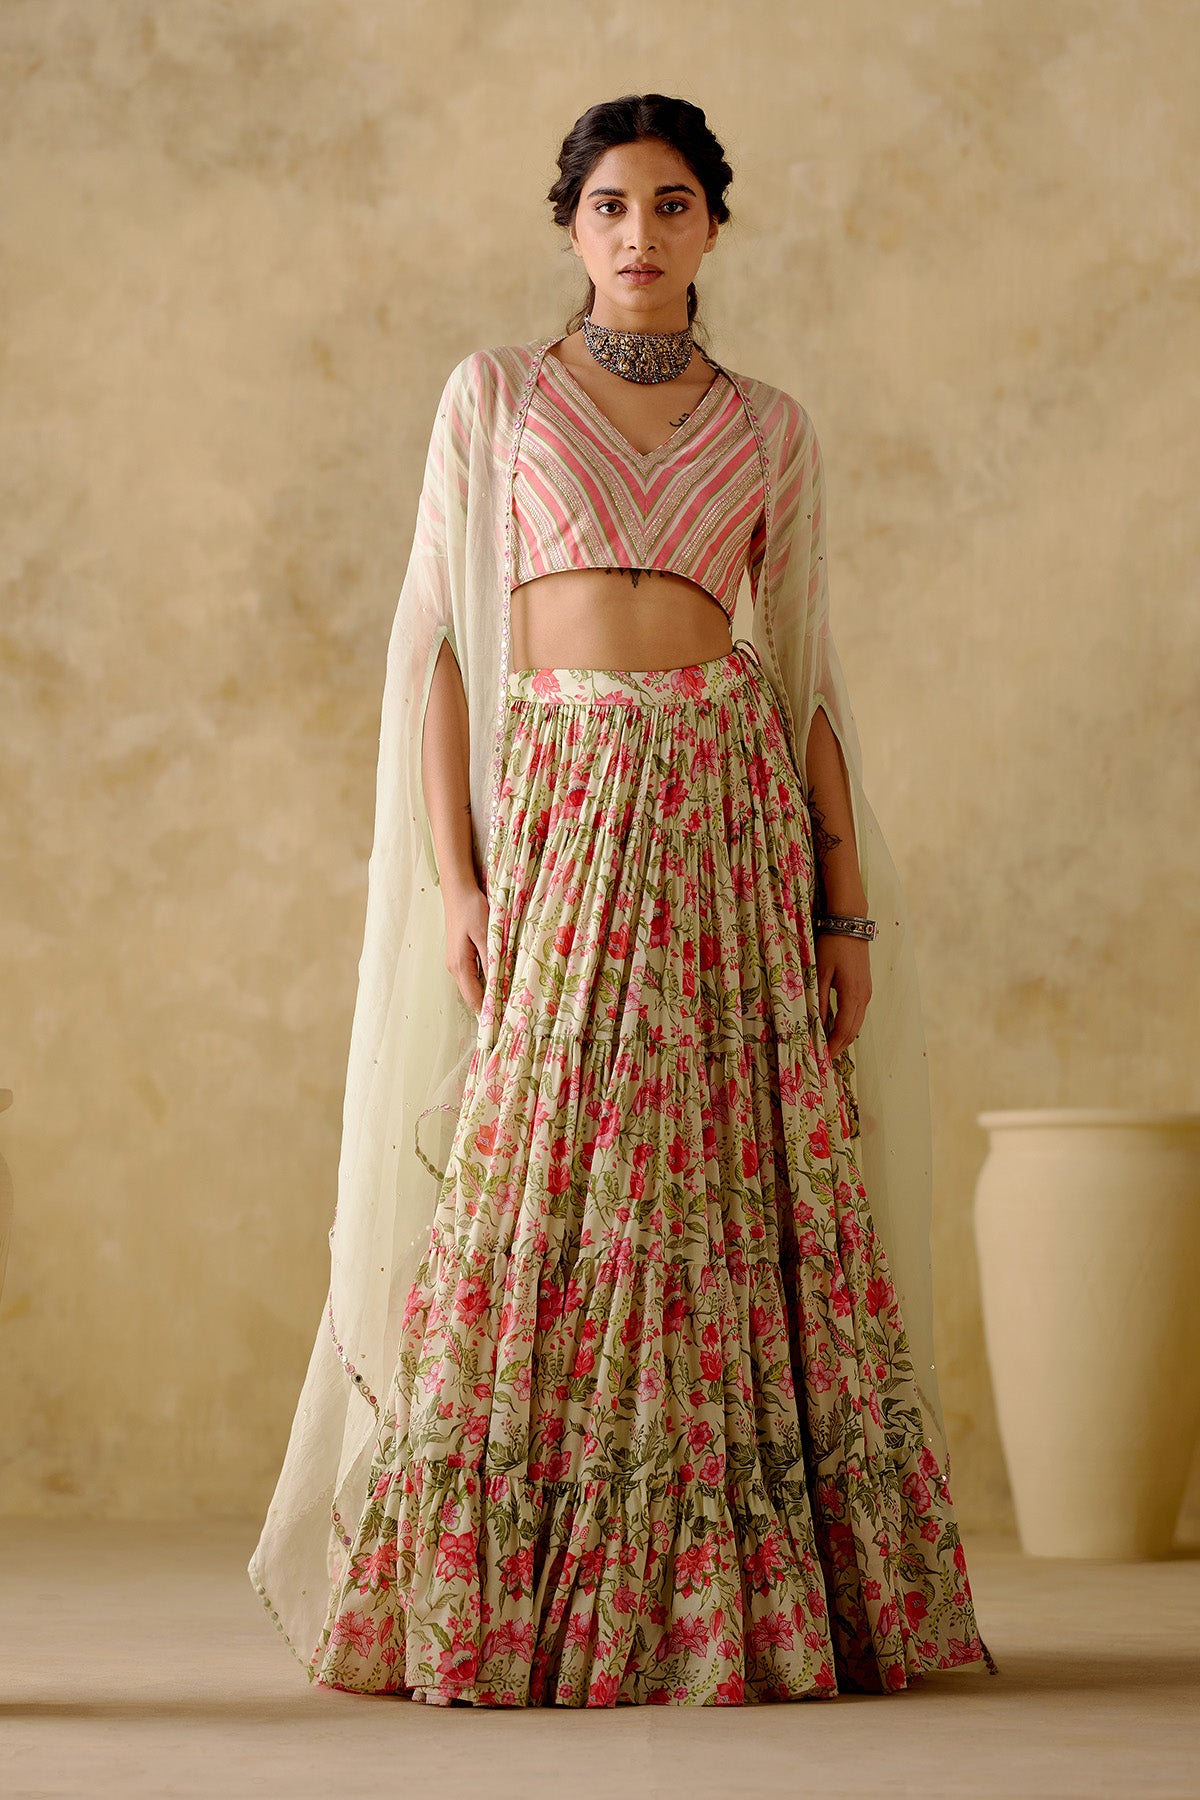 How to wear lehenga in different ways - How to wear lehenga | Stylish  dresses, Party wear indian dresses, Lehenga designs simple